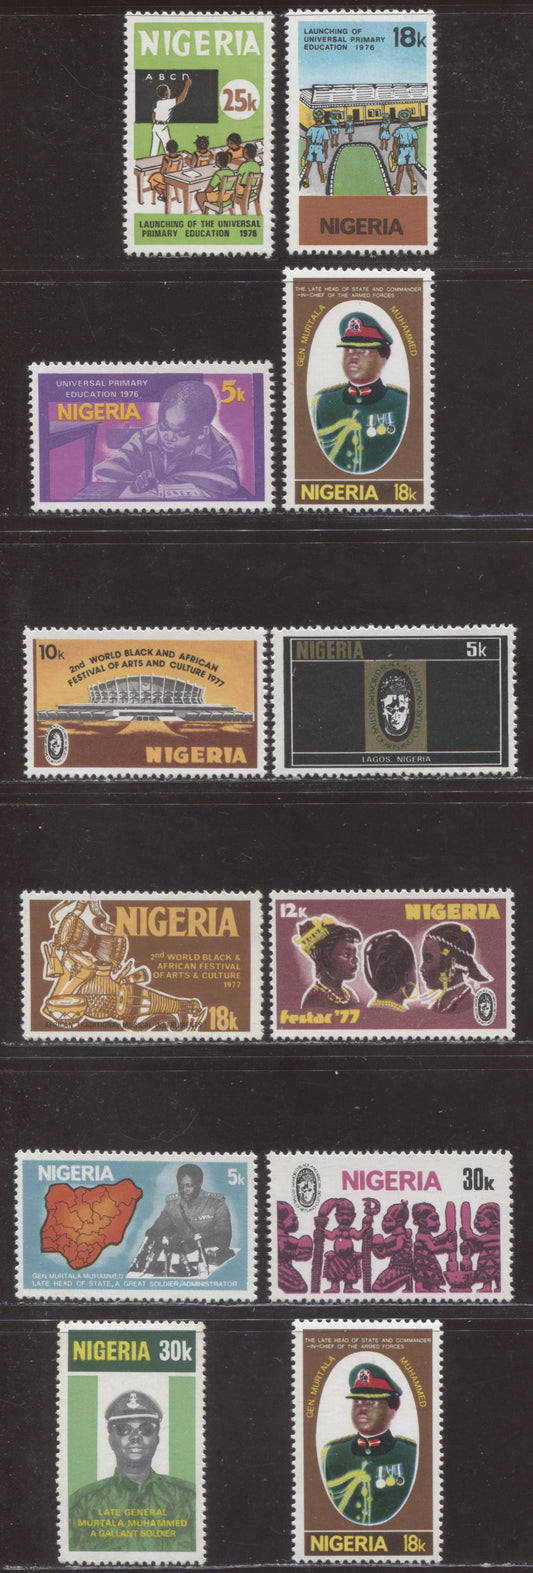 Nigeria SC#337-347 1976-1977 Education-General Murtala Issues, 12 VFNH Singles, Click on Listing to See ALL Pictures, 2017 Scott Cat. $6.4 USD